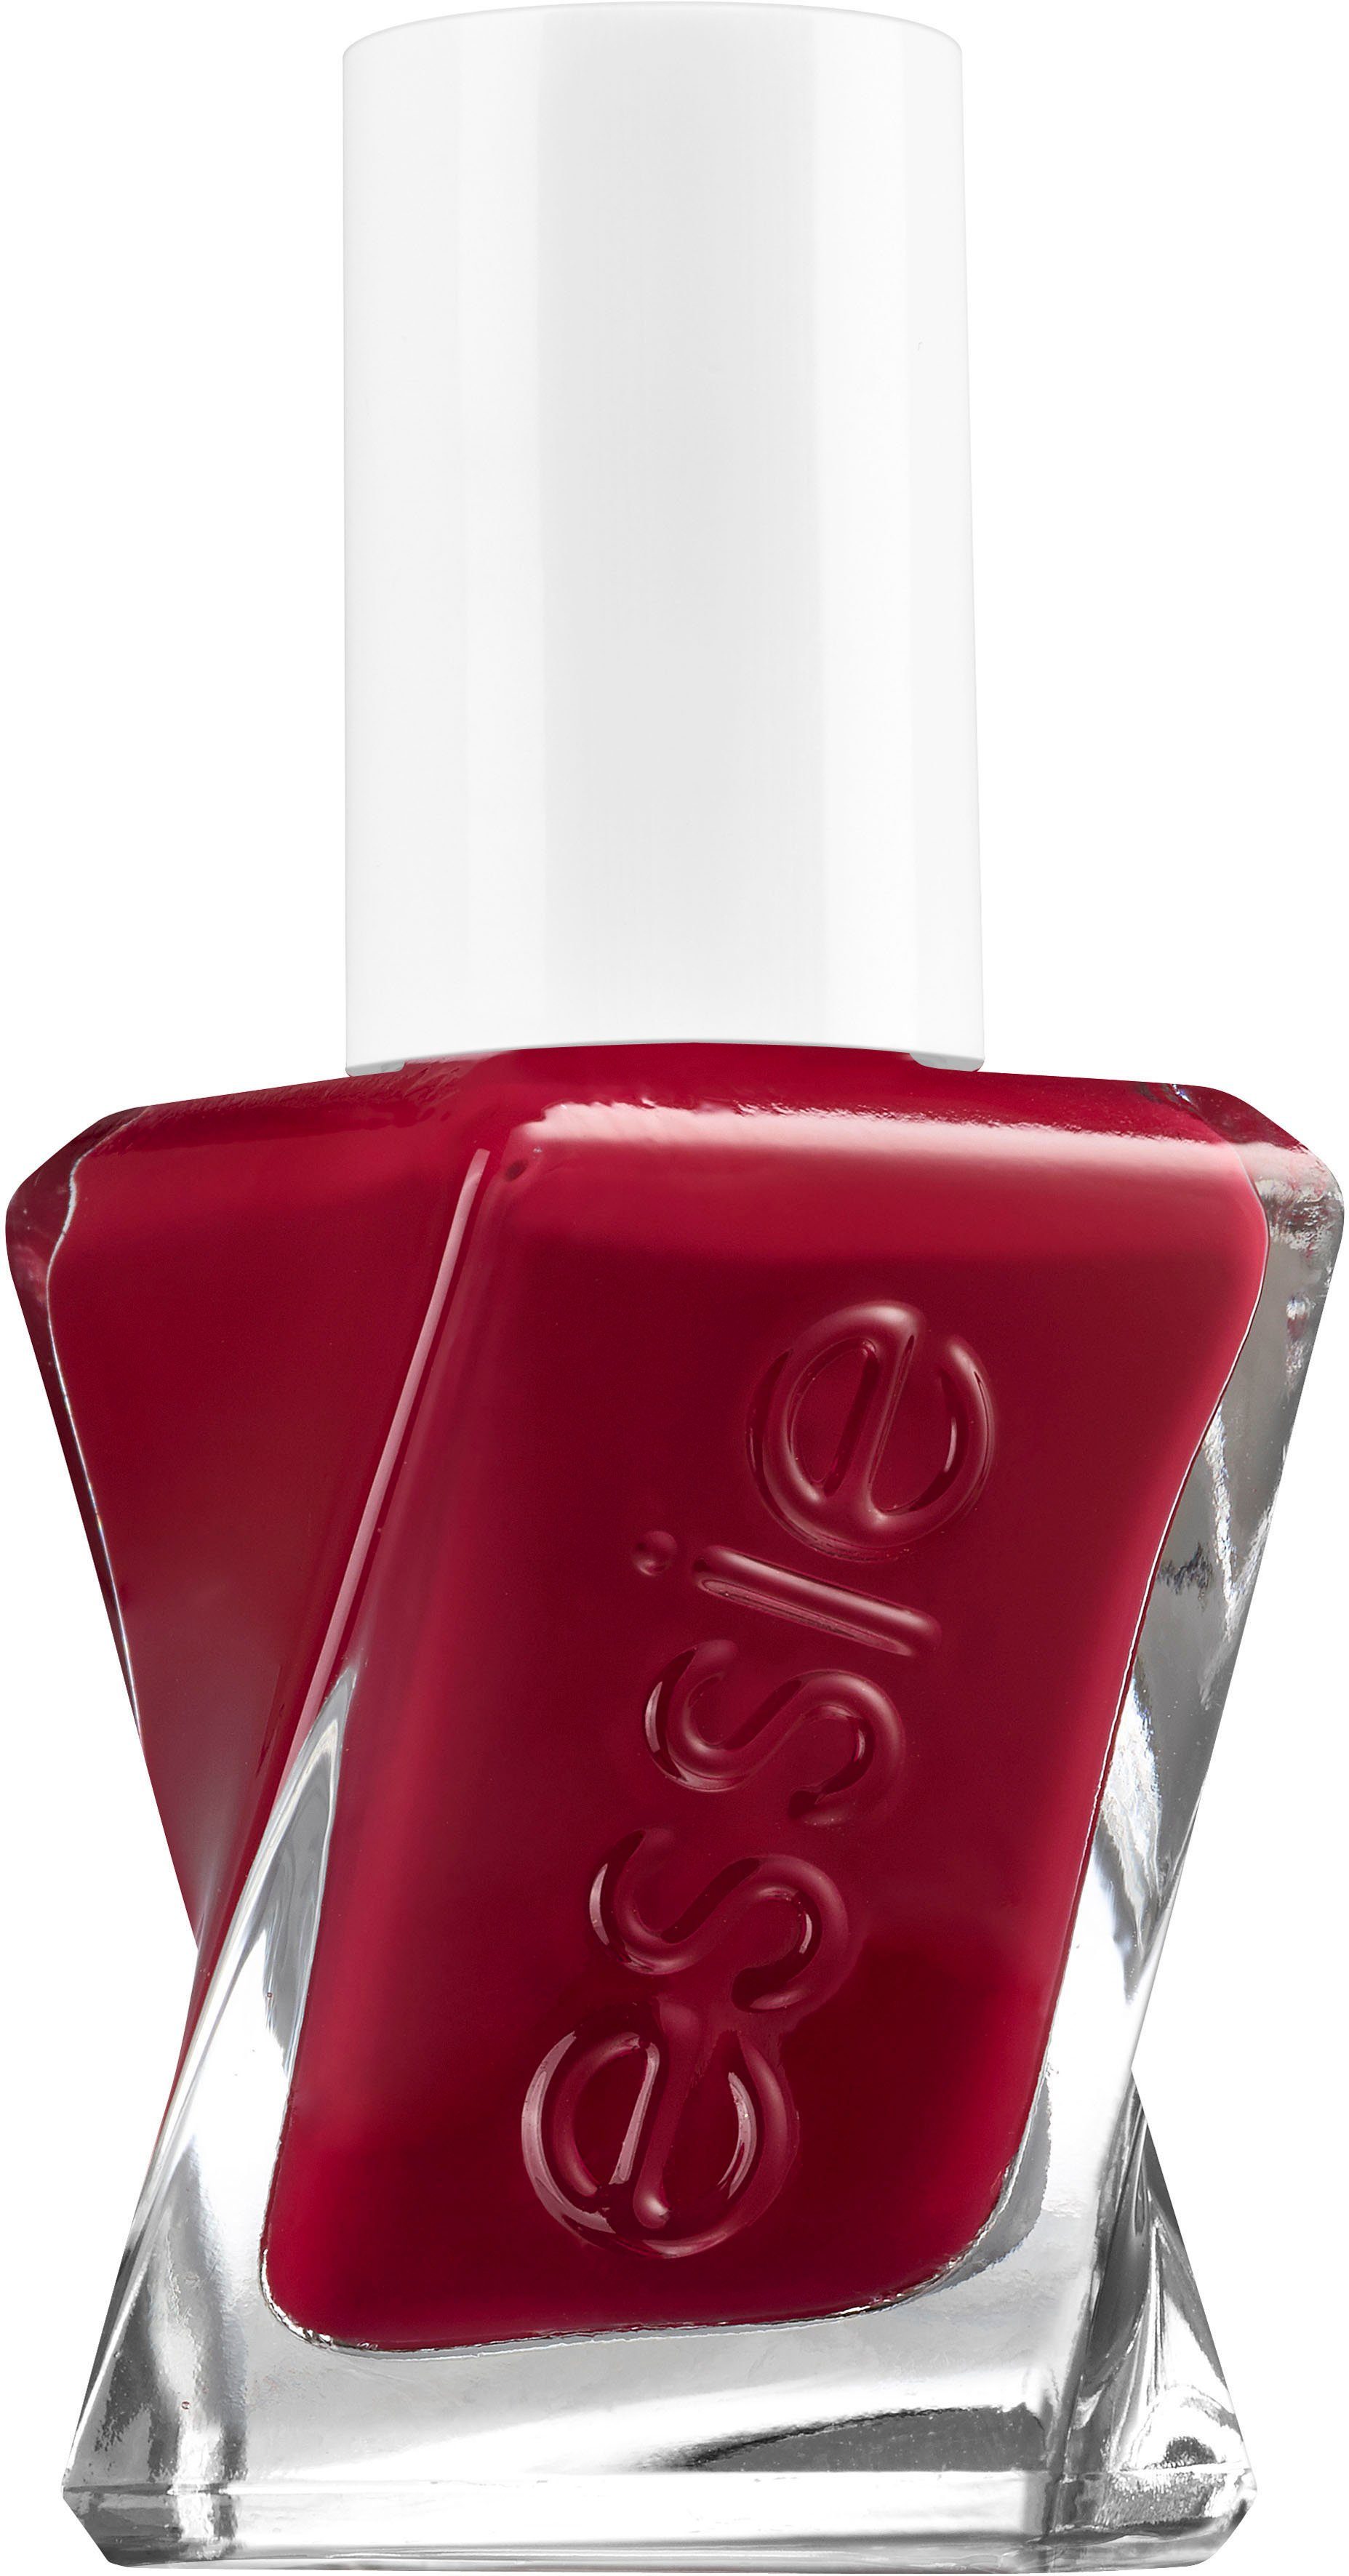 Gel-Nagellack 509 Rot Paint Nr. essie Gel red the Couture gown